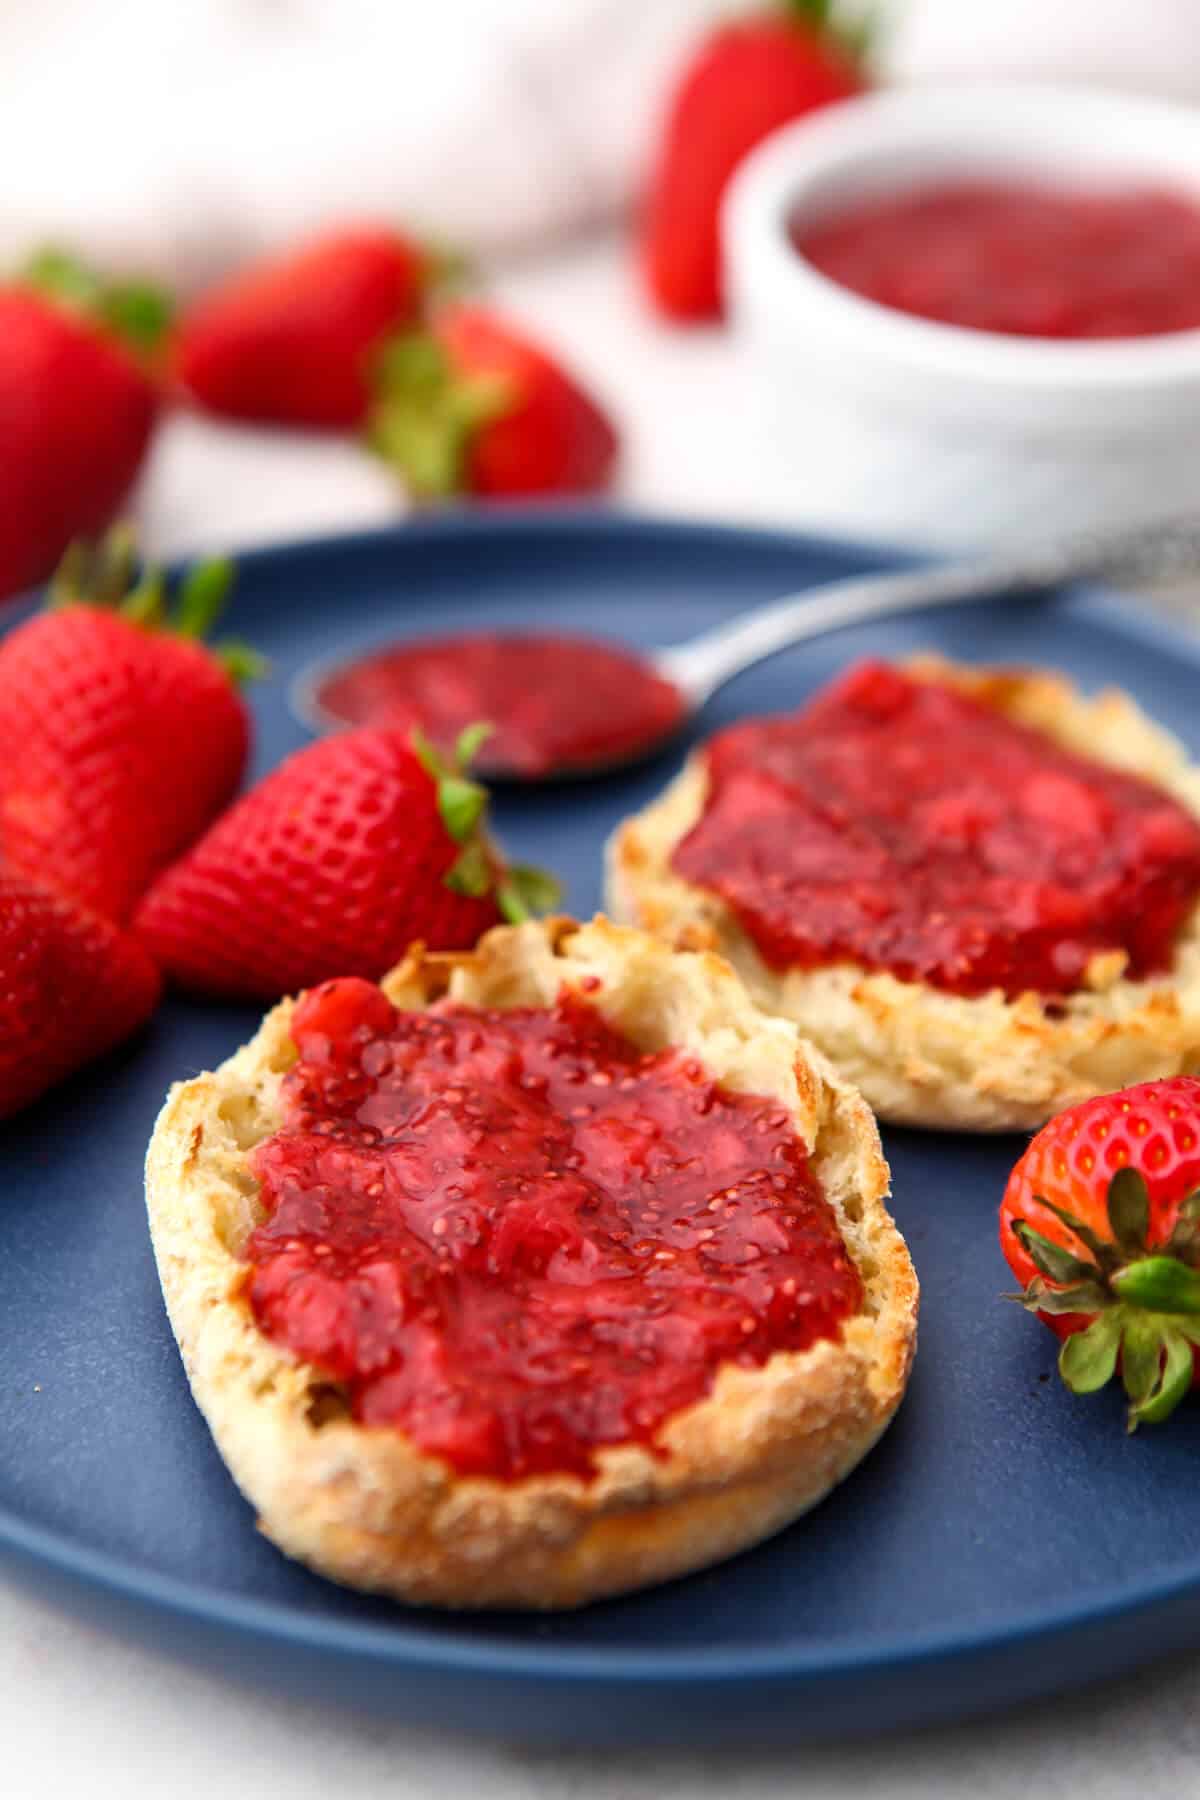 Vegan strawberry chia jam spread on English muffins sitting on a blue plate.